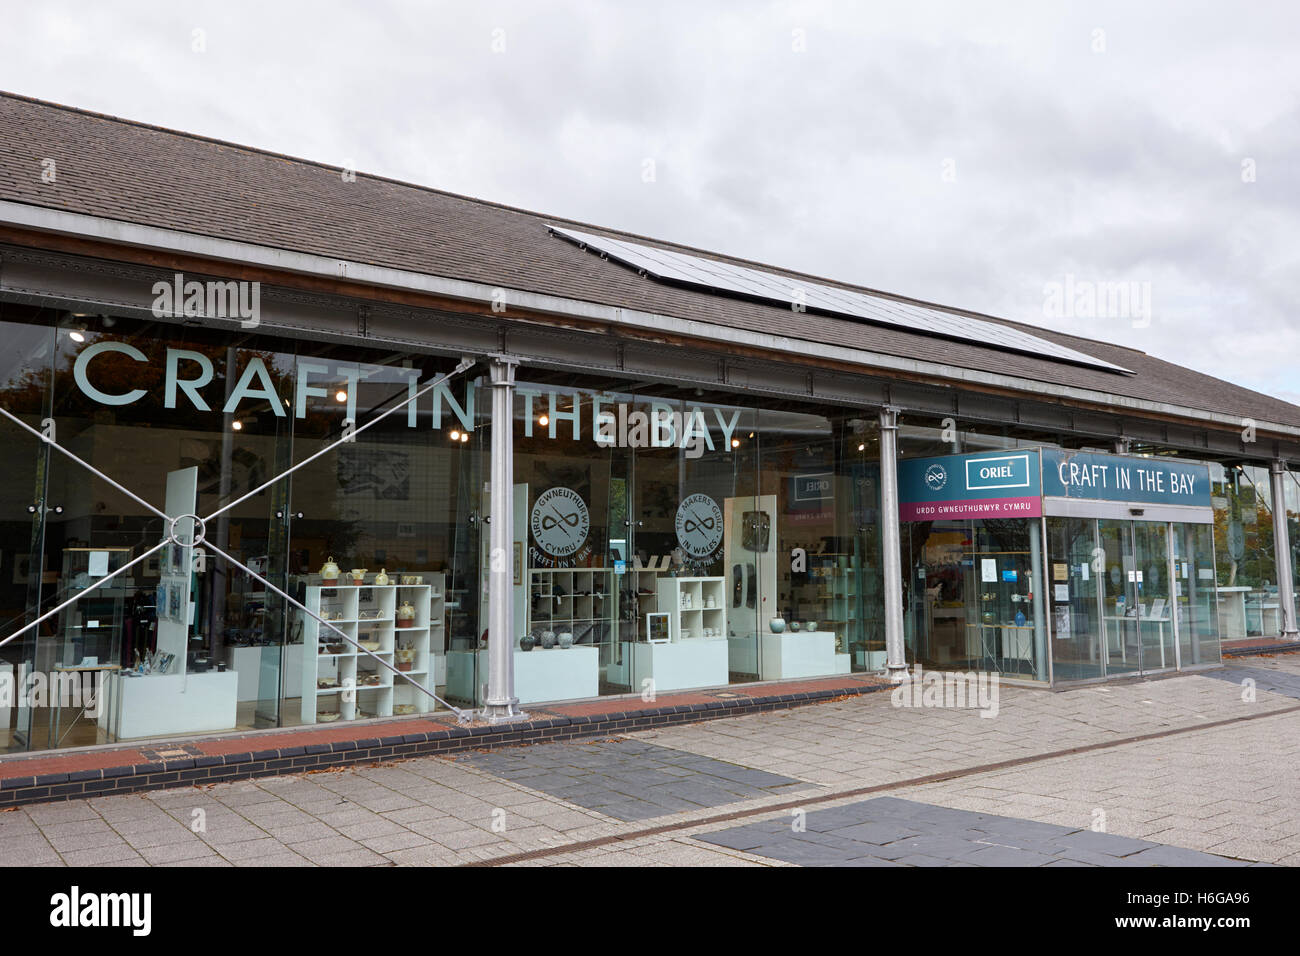 craft in the bay gallery operated by the makers guild in wales Cardiff Wales United Kingdom Stock Photo